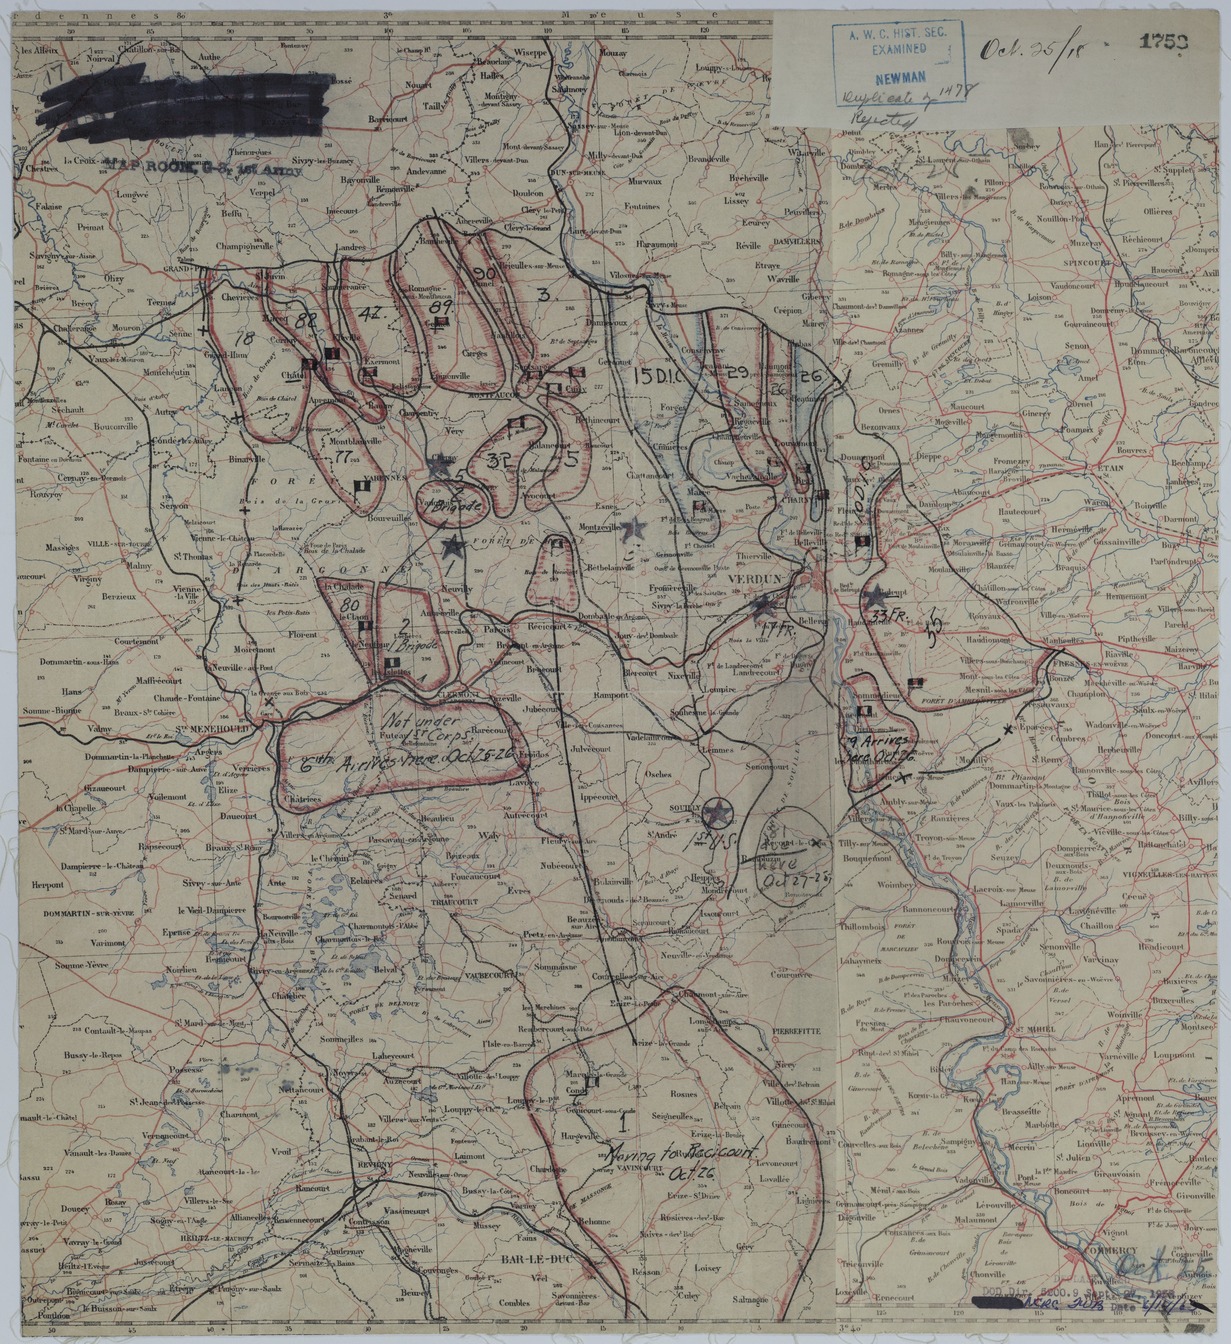 Map of Divisional Positions on October 25, 1918